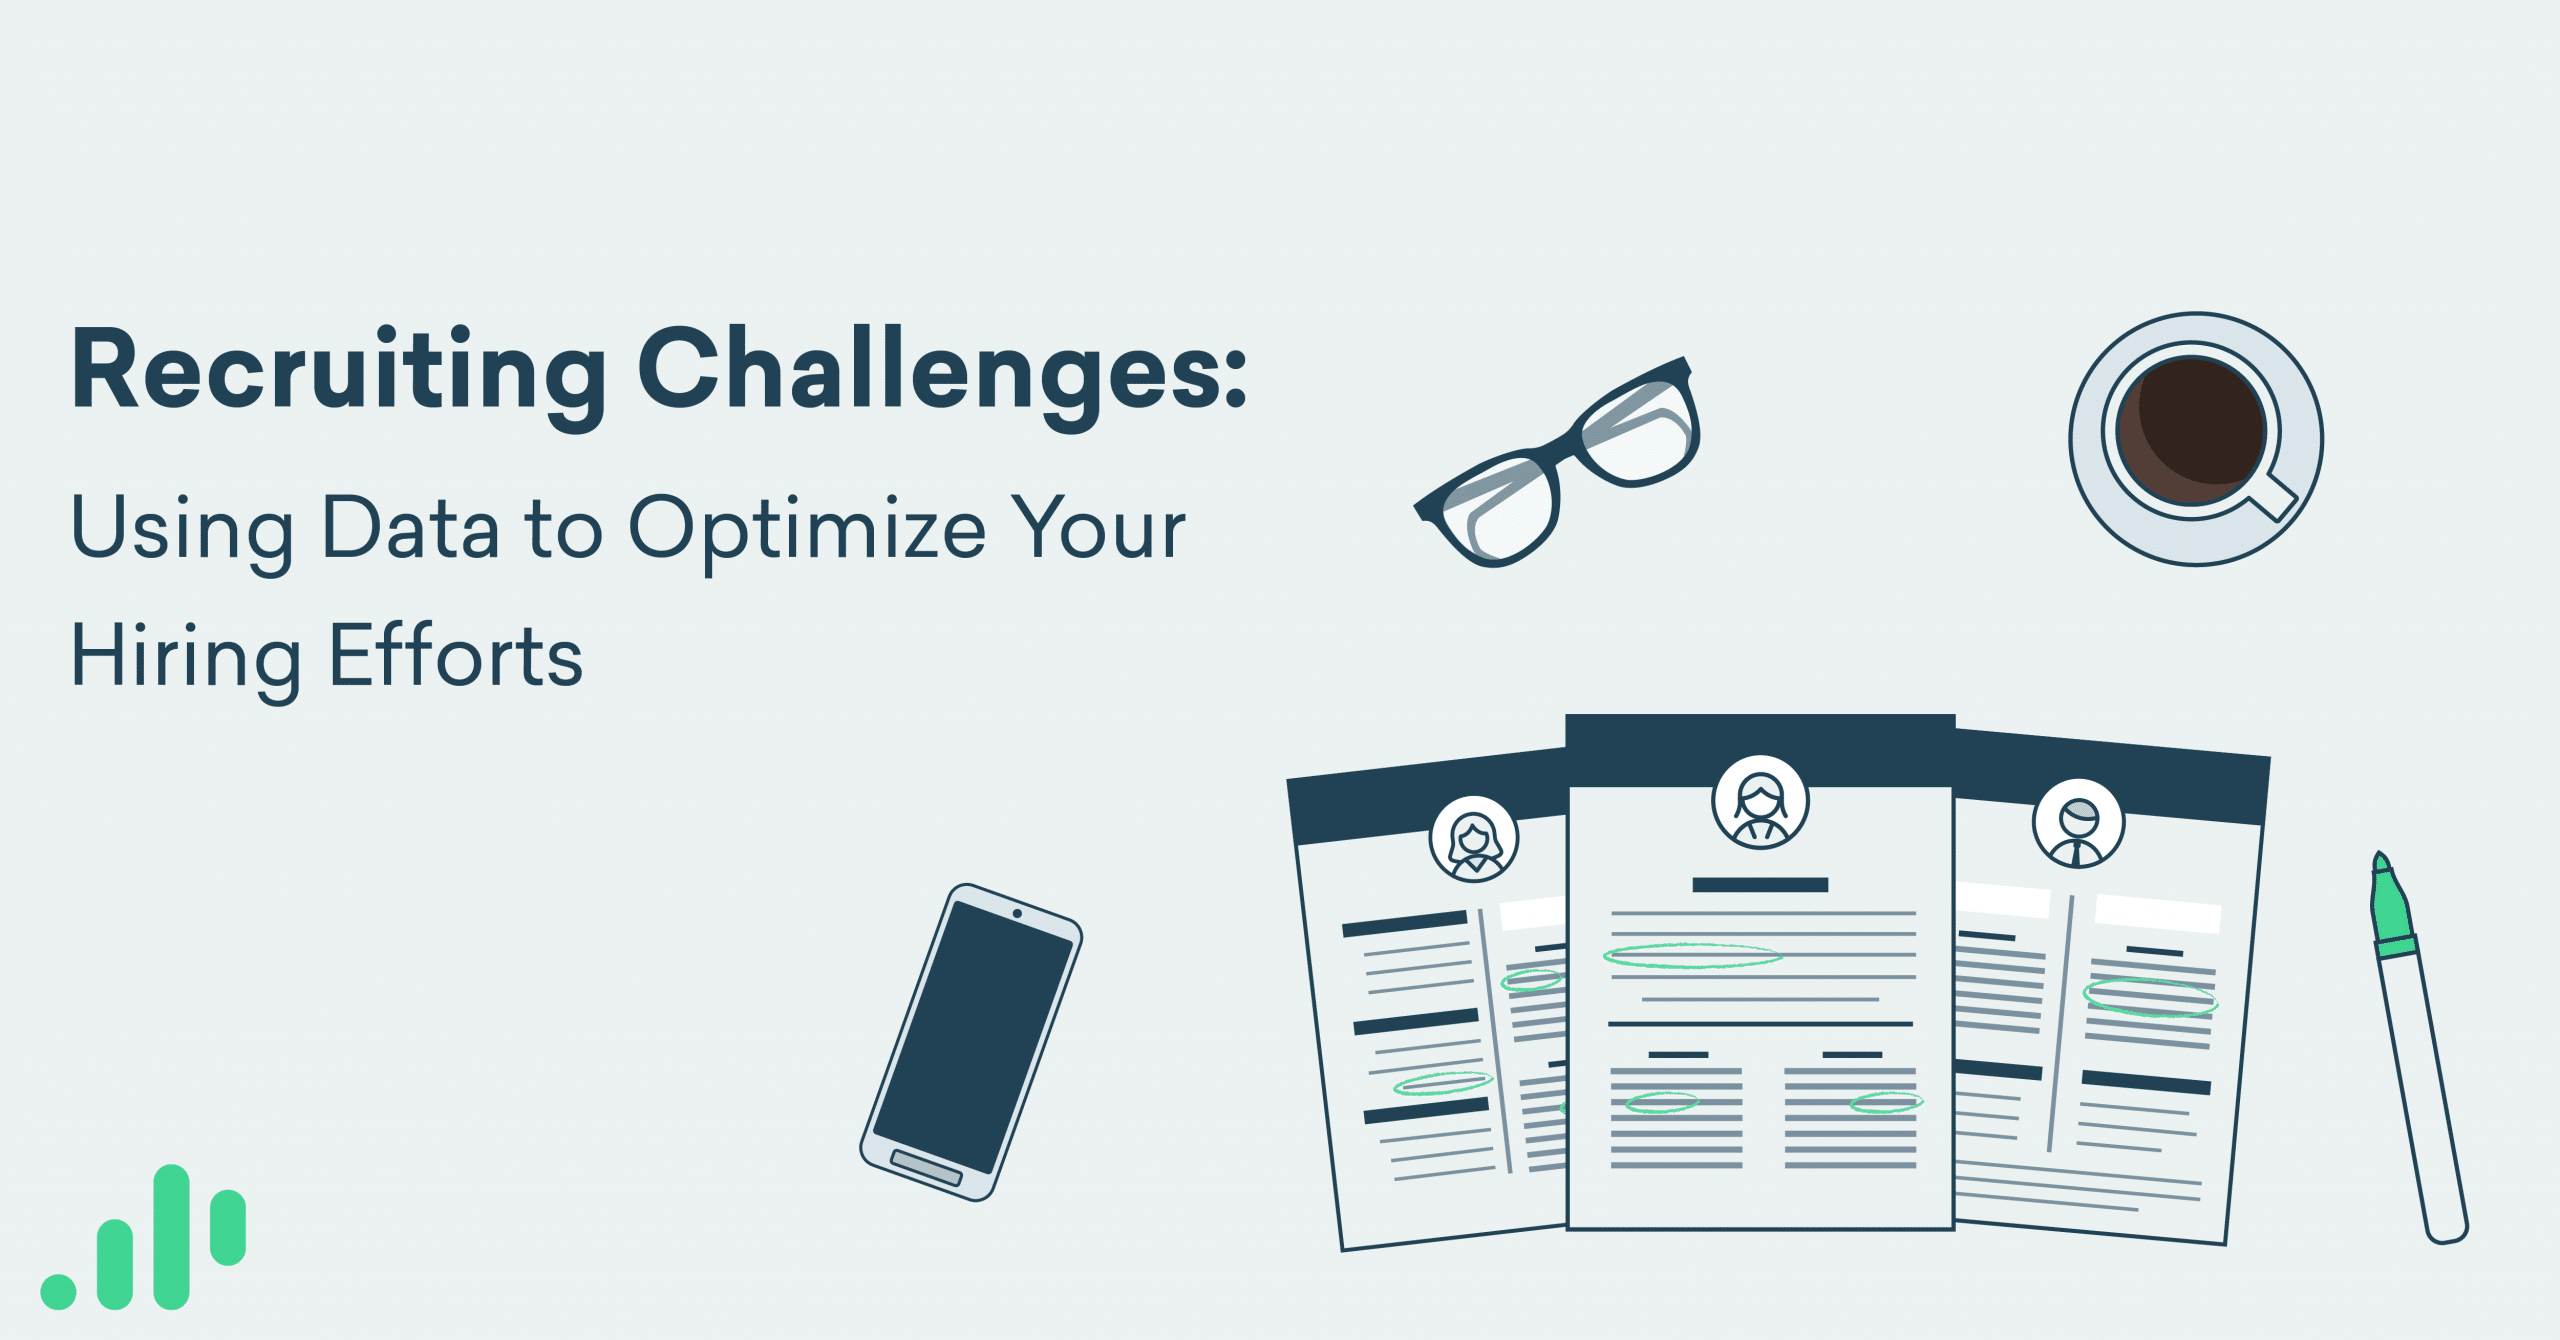 Recruiting Challenges: Using Data to Optimize Your Hiring Efforts